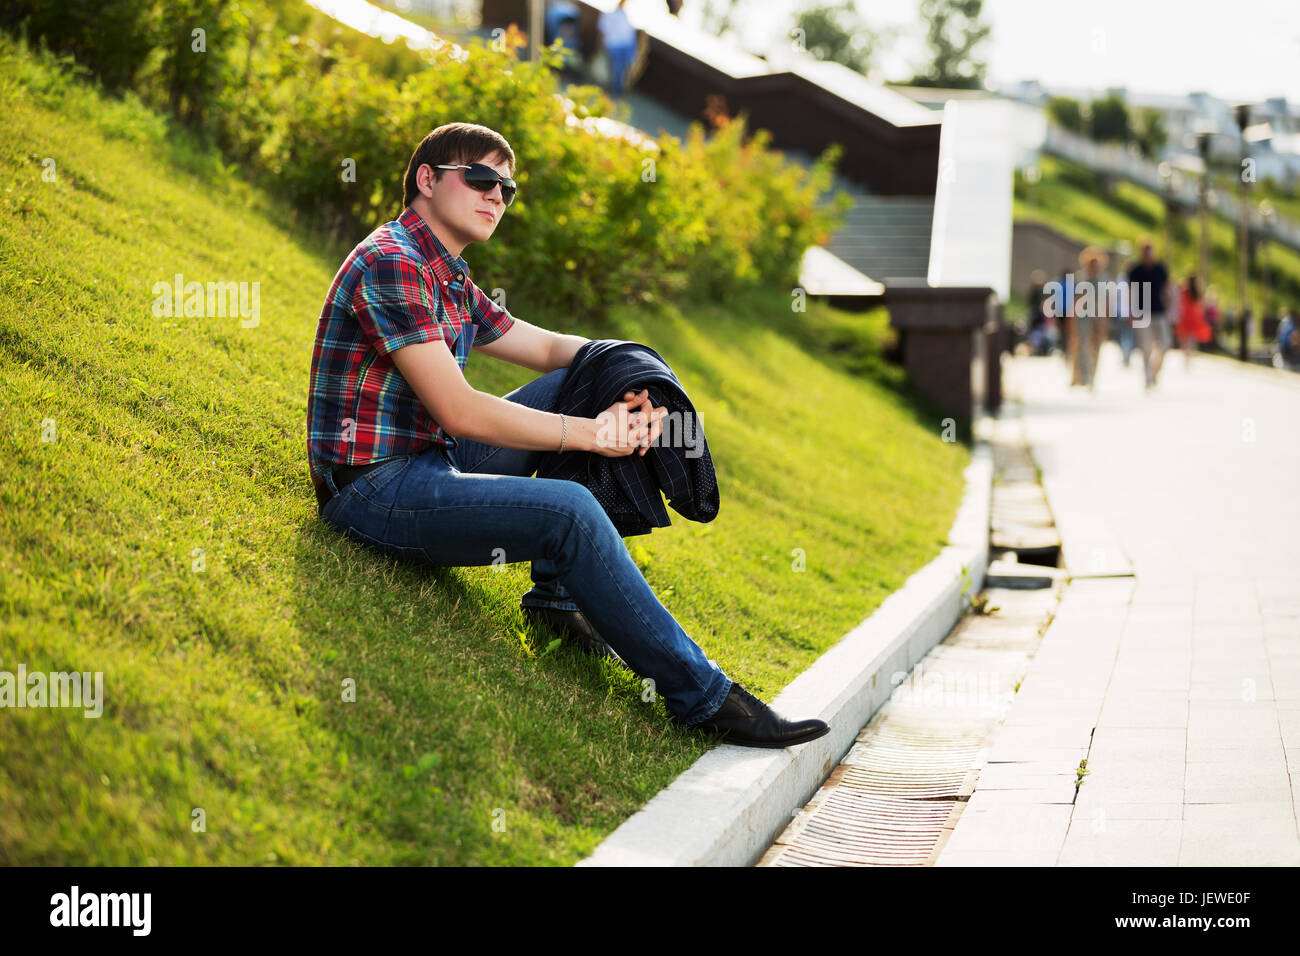 Young fashion man in sunglasses sitting on the grass in a city park Stock Photo